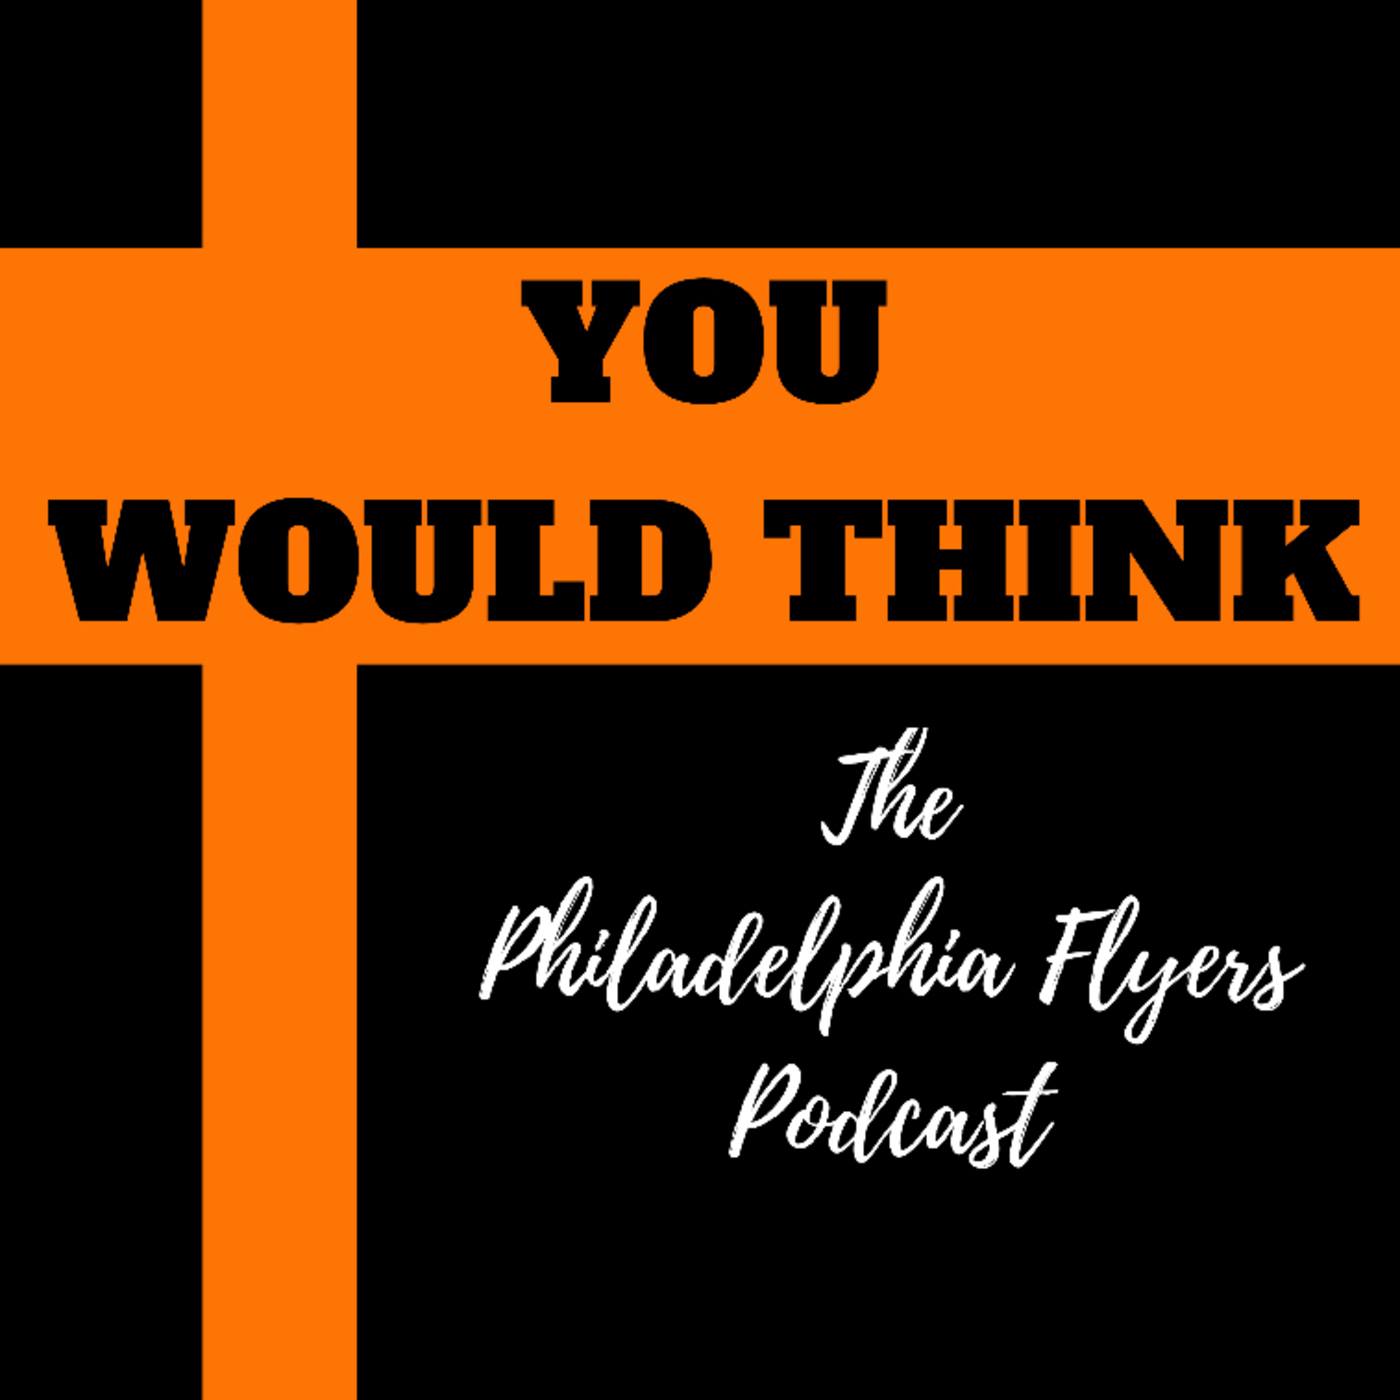 YWT: The Philadelphia Flyers Podcast – YWT #202 – The Present and the Future